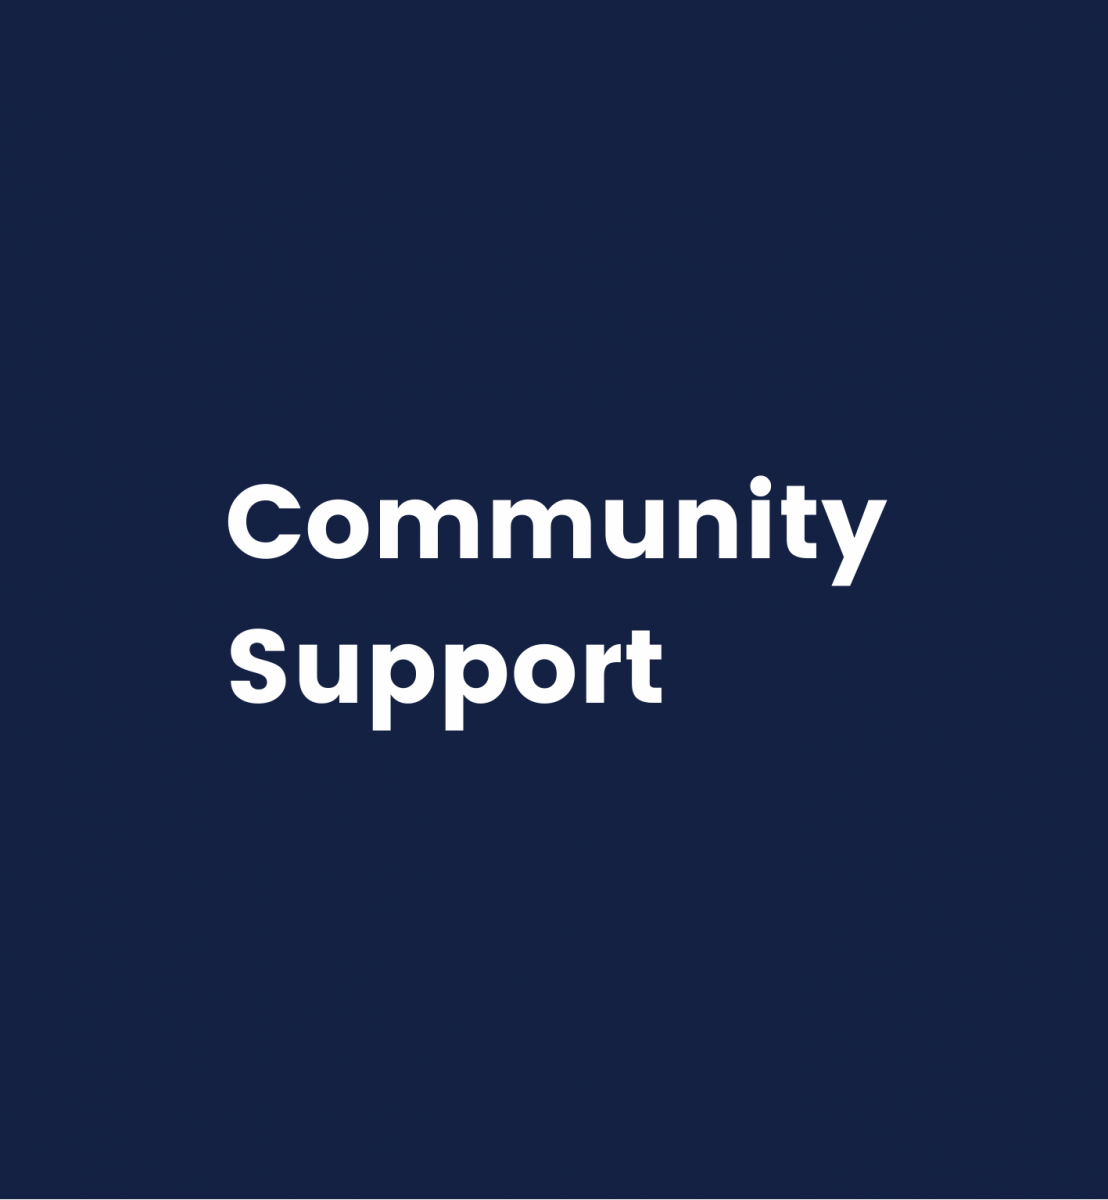 Tab to click through to Community Support services